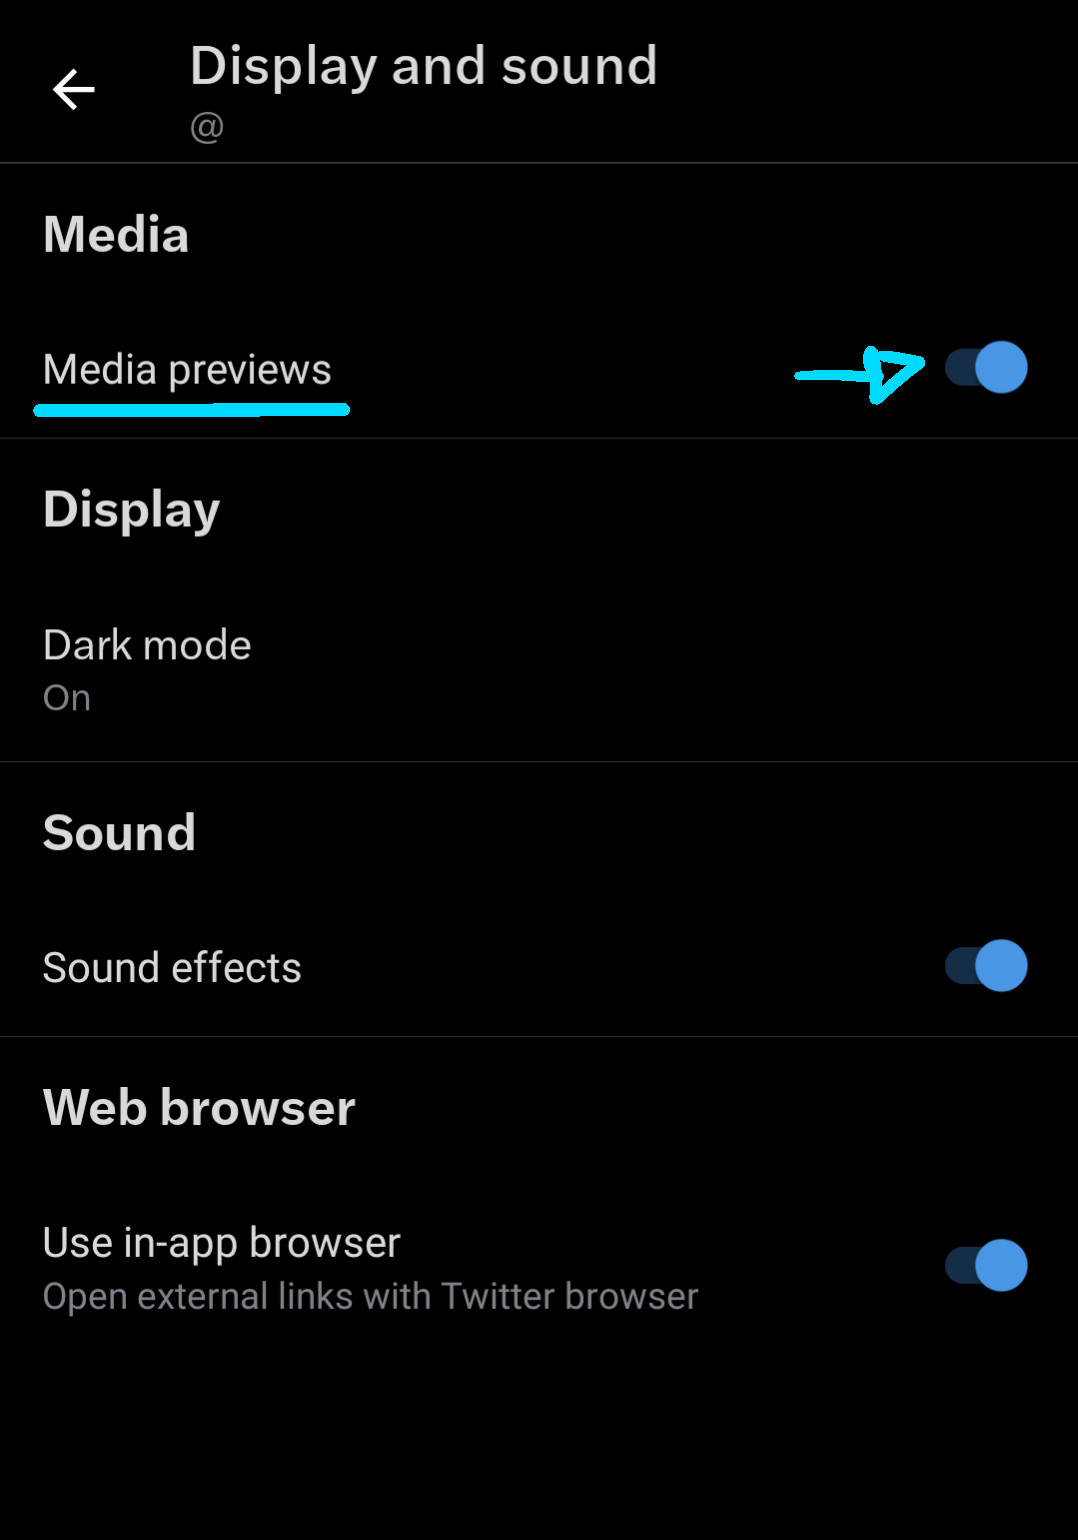 The display and sound submenu in Twitter’s accessibility settings, with the ‘media previews’ location highlighted at the top of the image below the media subtitle.